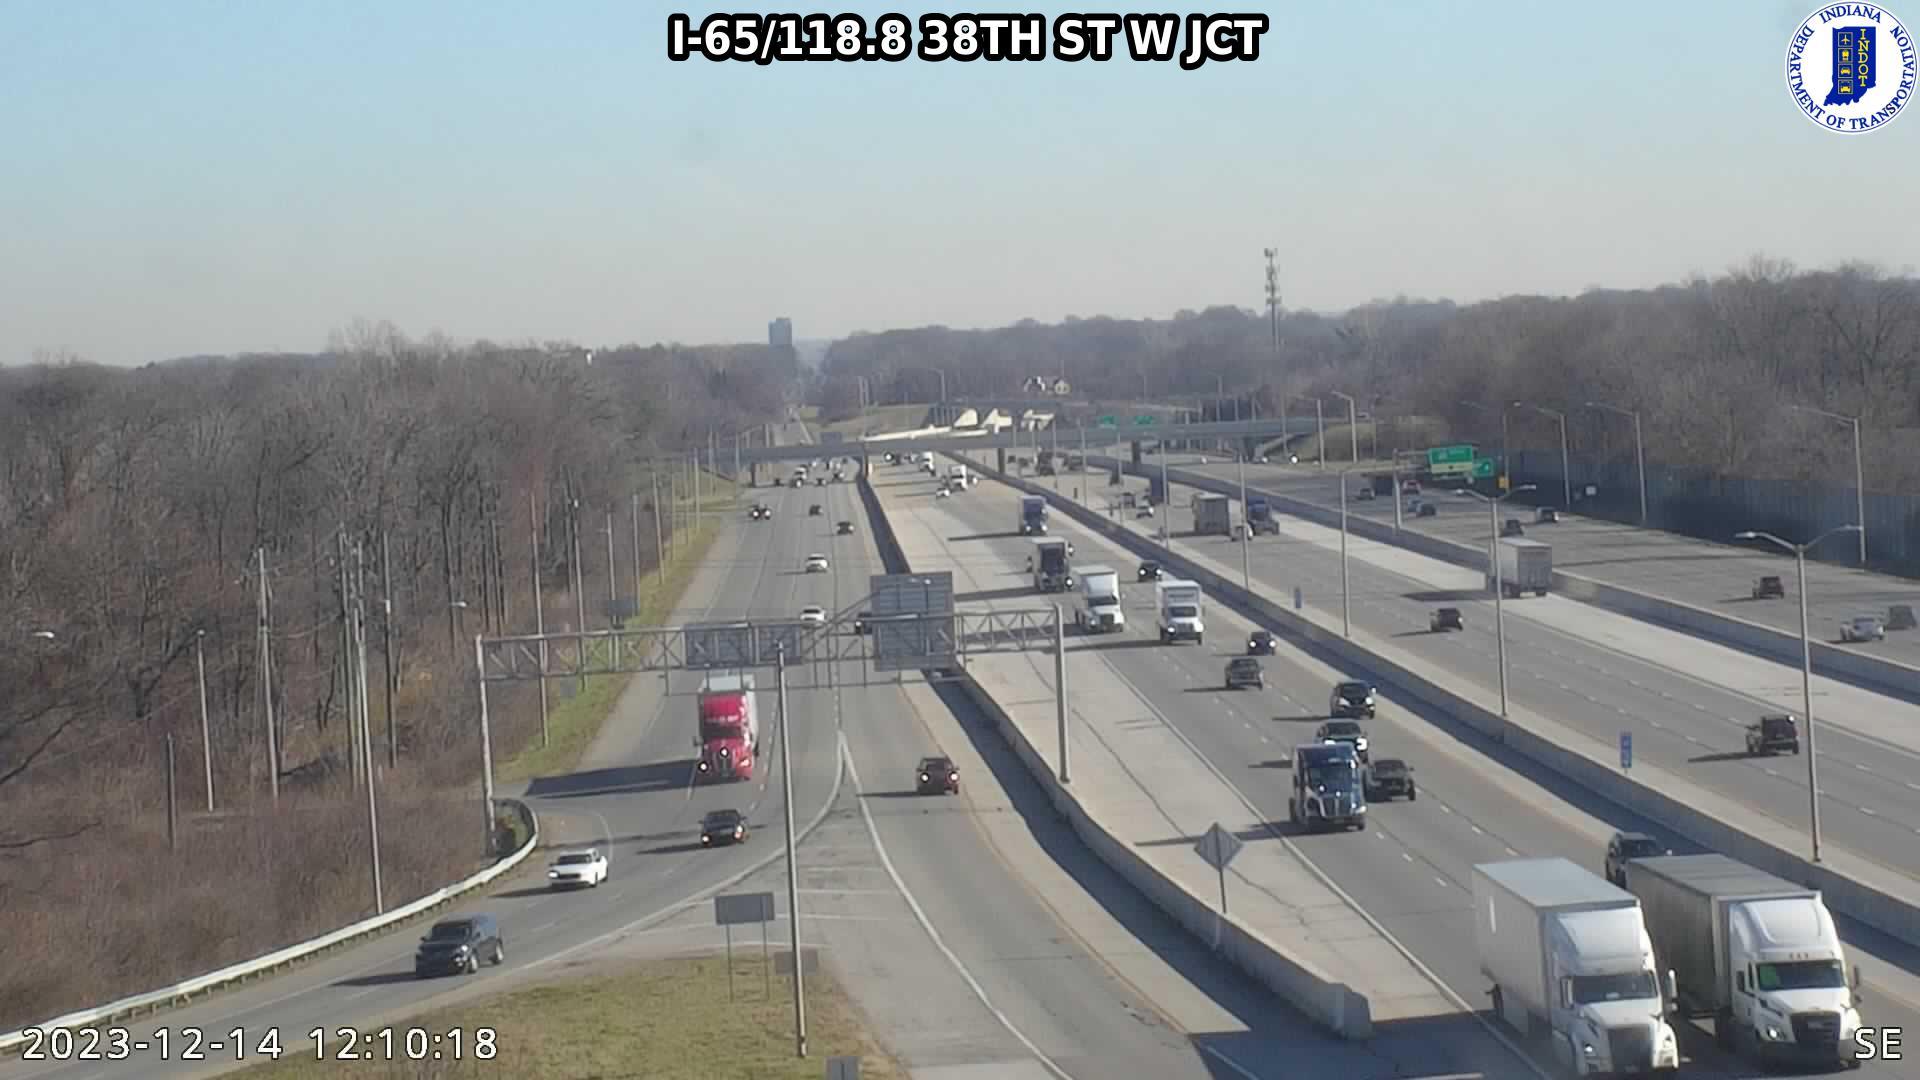 Traffic Cam Indianapolis: I-65: I-65/118.8 38TH ST W JCT Player